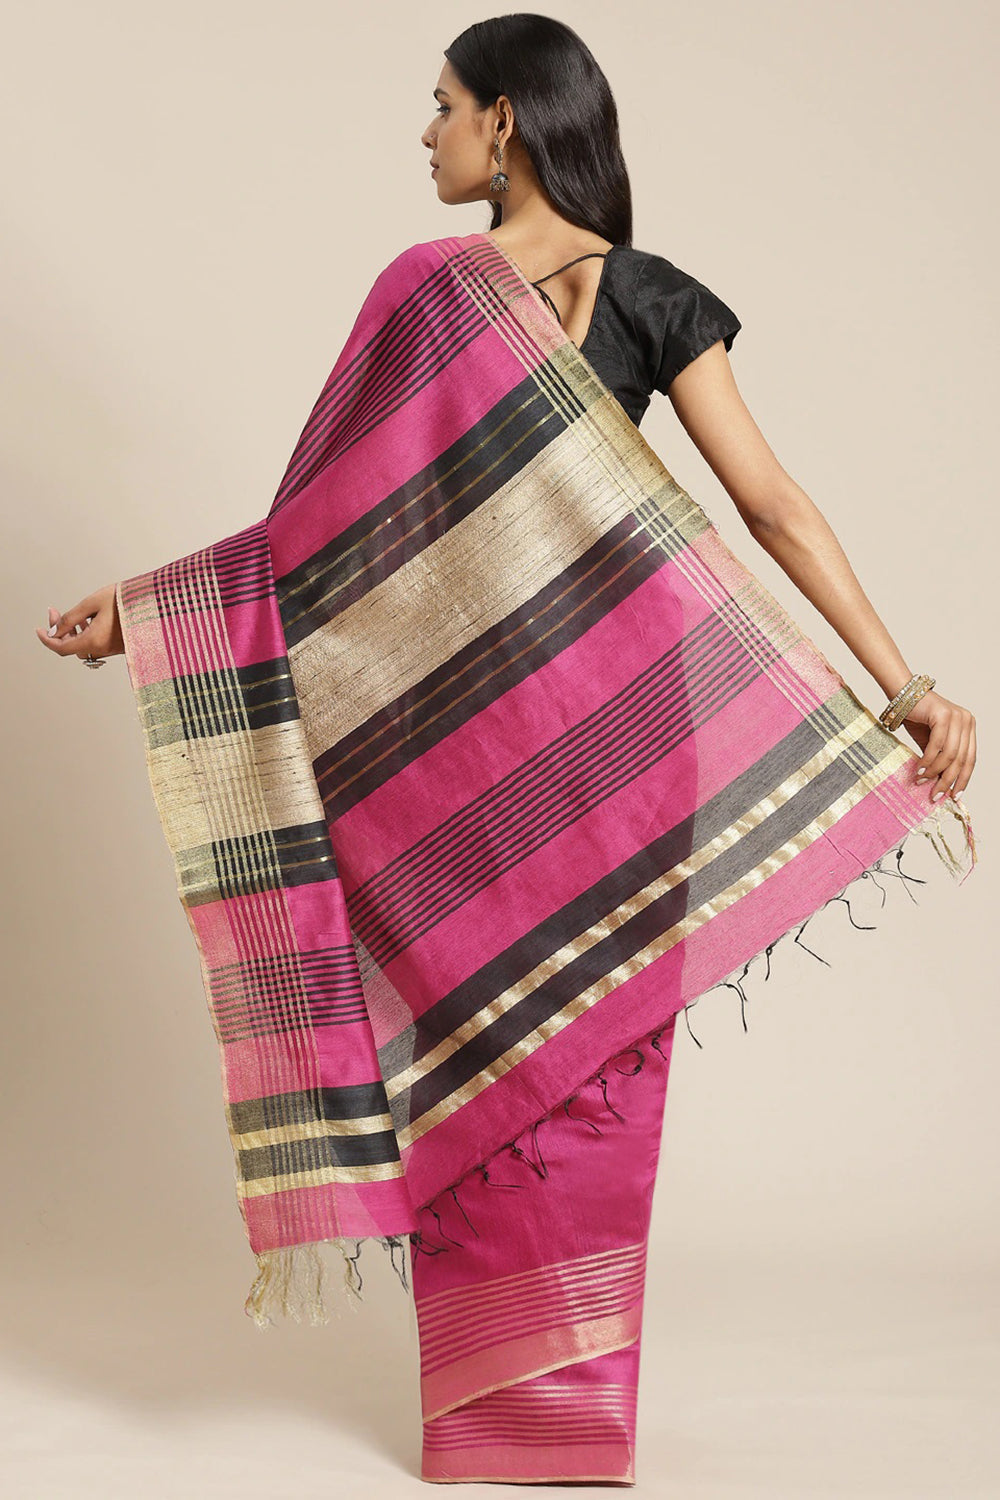 Shop Ana Multi-Color Woven Cotton Silk One Minute Saree at best offer at our  Store - One Minute Saree